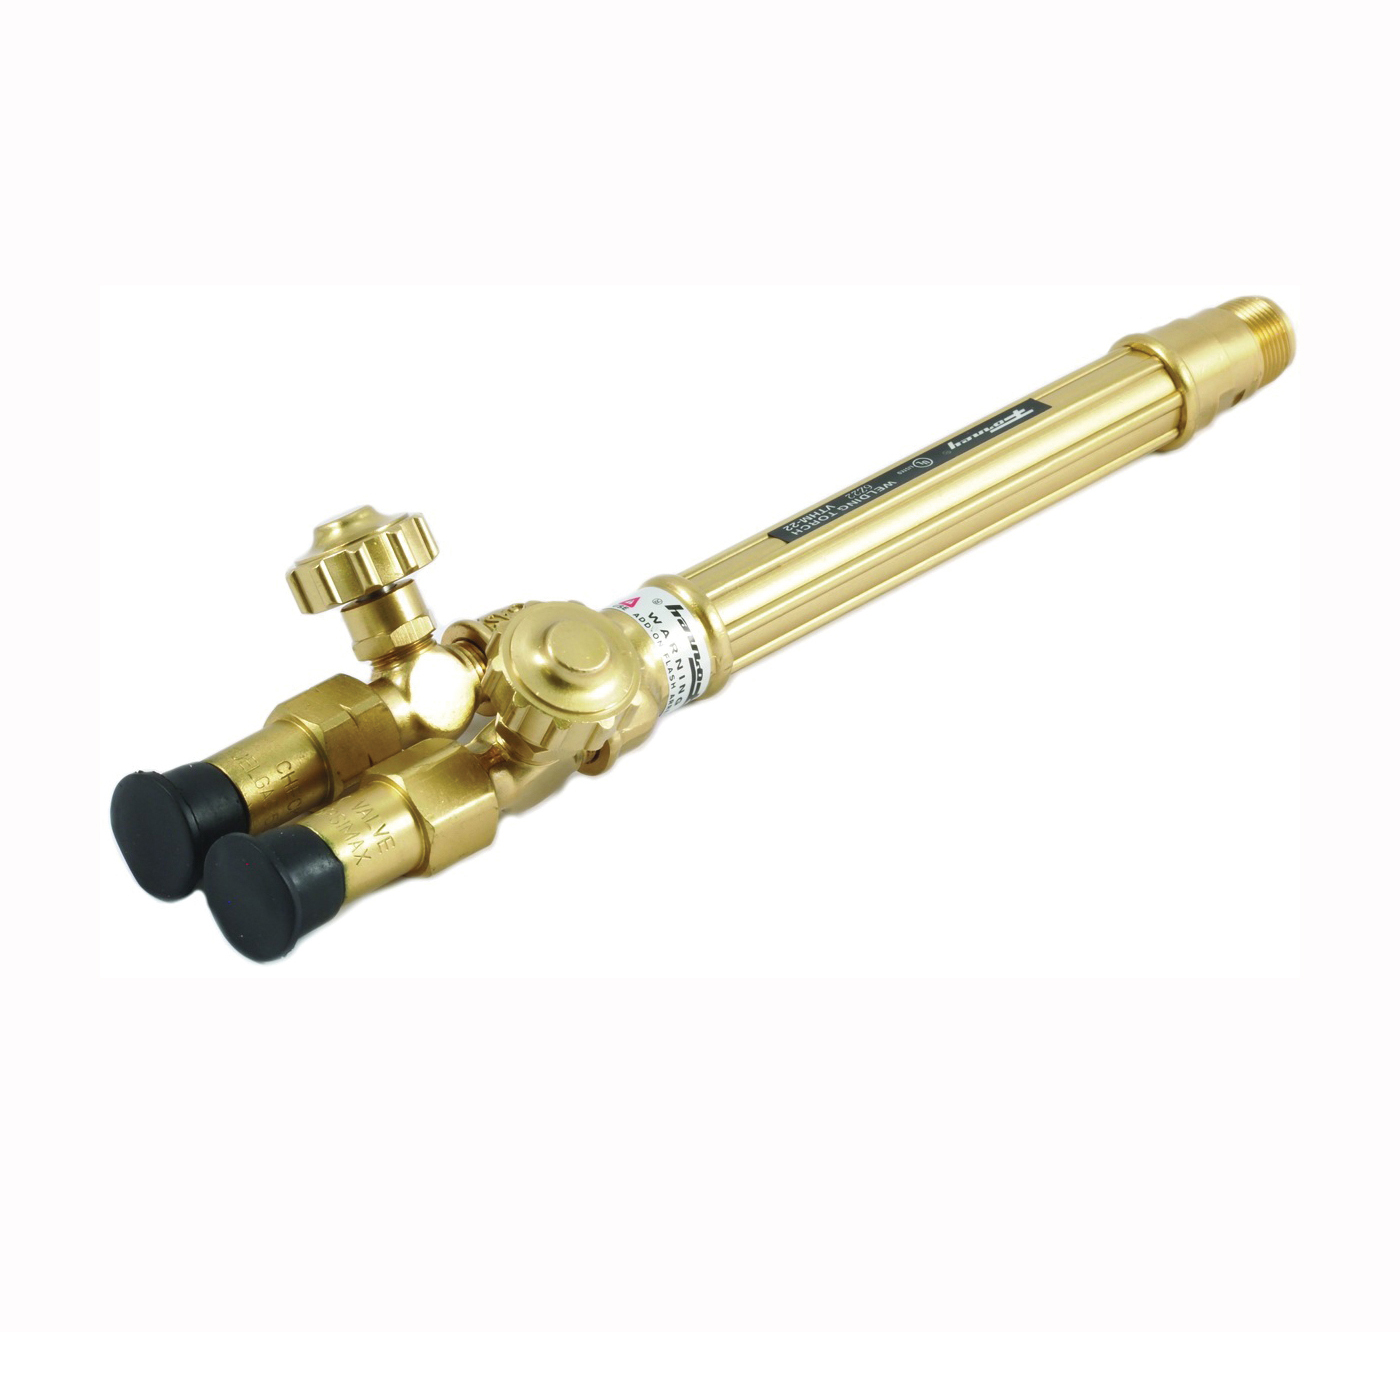 87093 Torch Handle, Compatible, Medium Duty, Oxy-Acetylene, Tough Extruded Brass